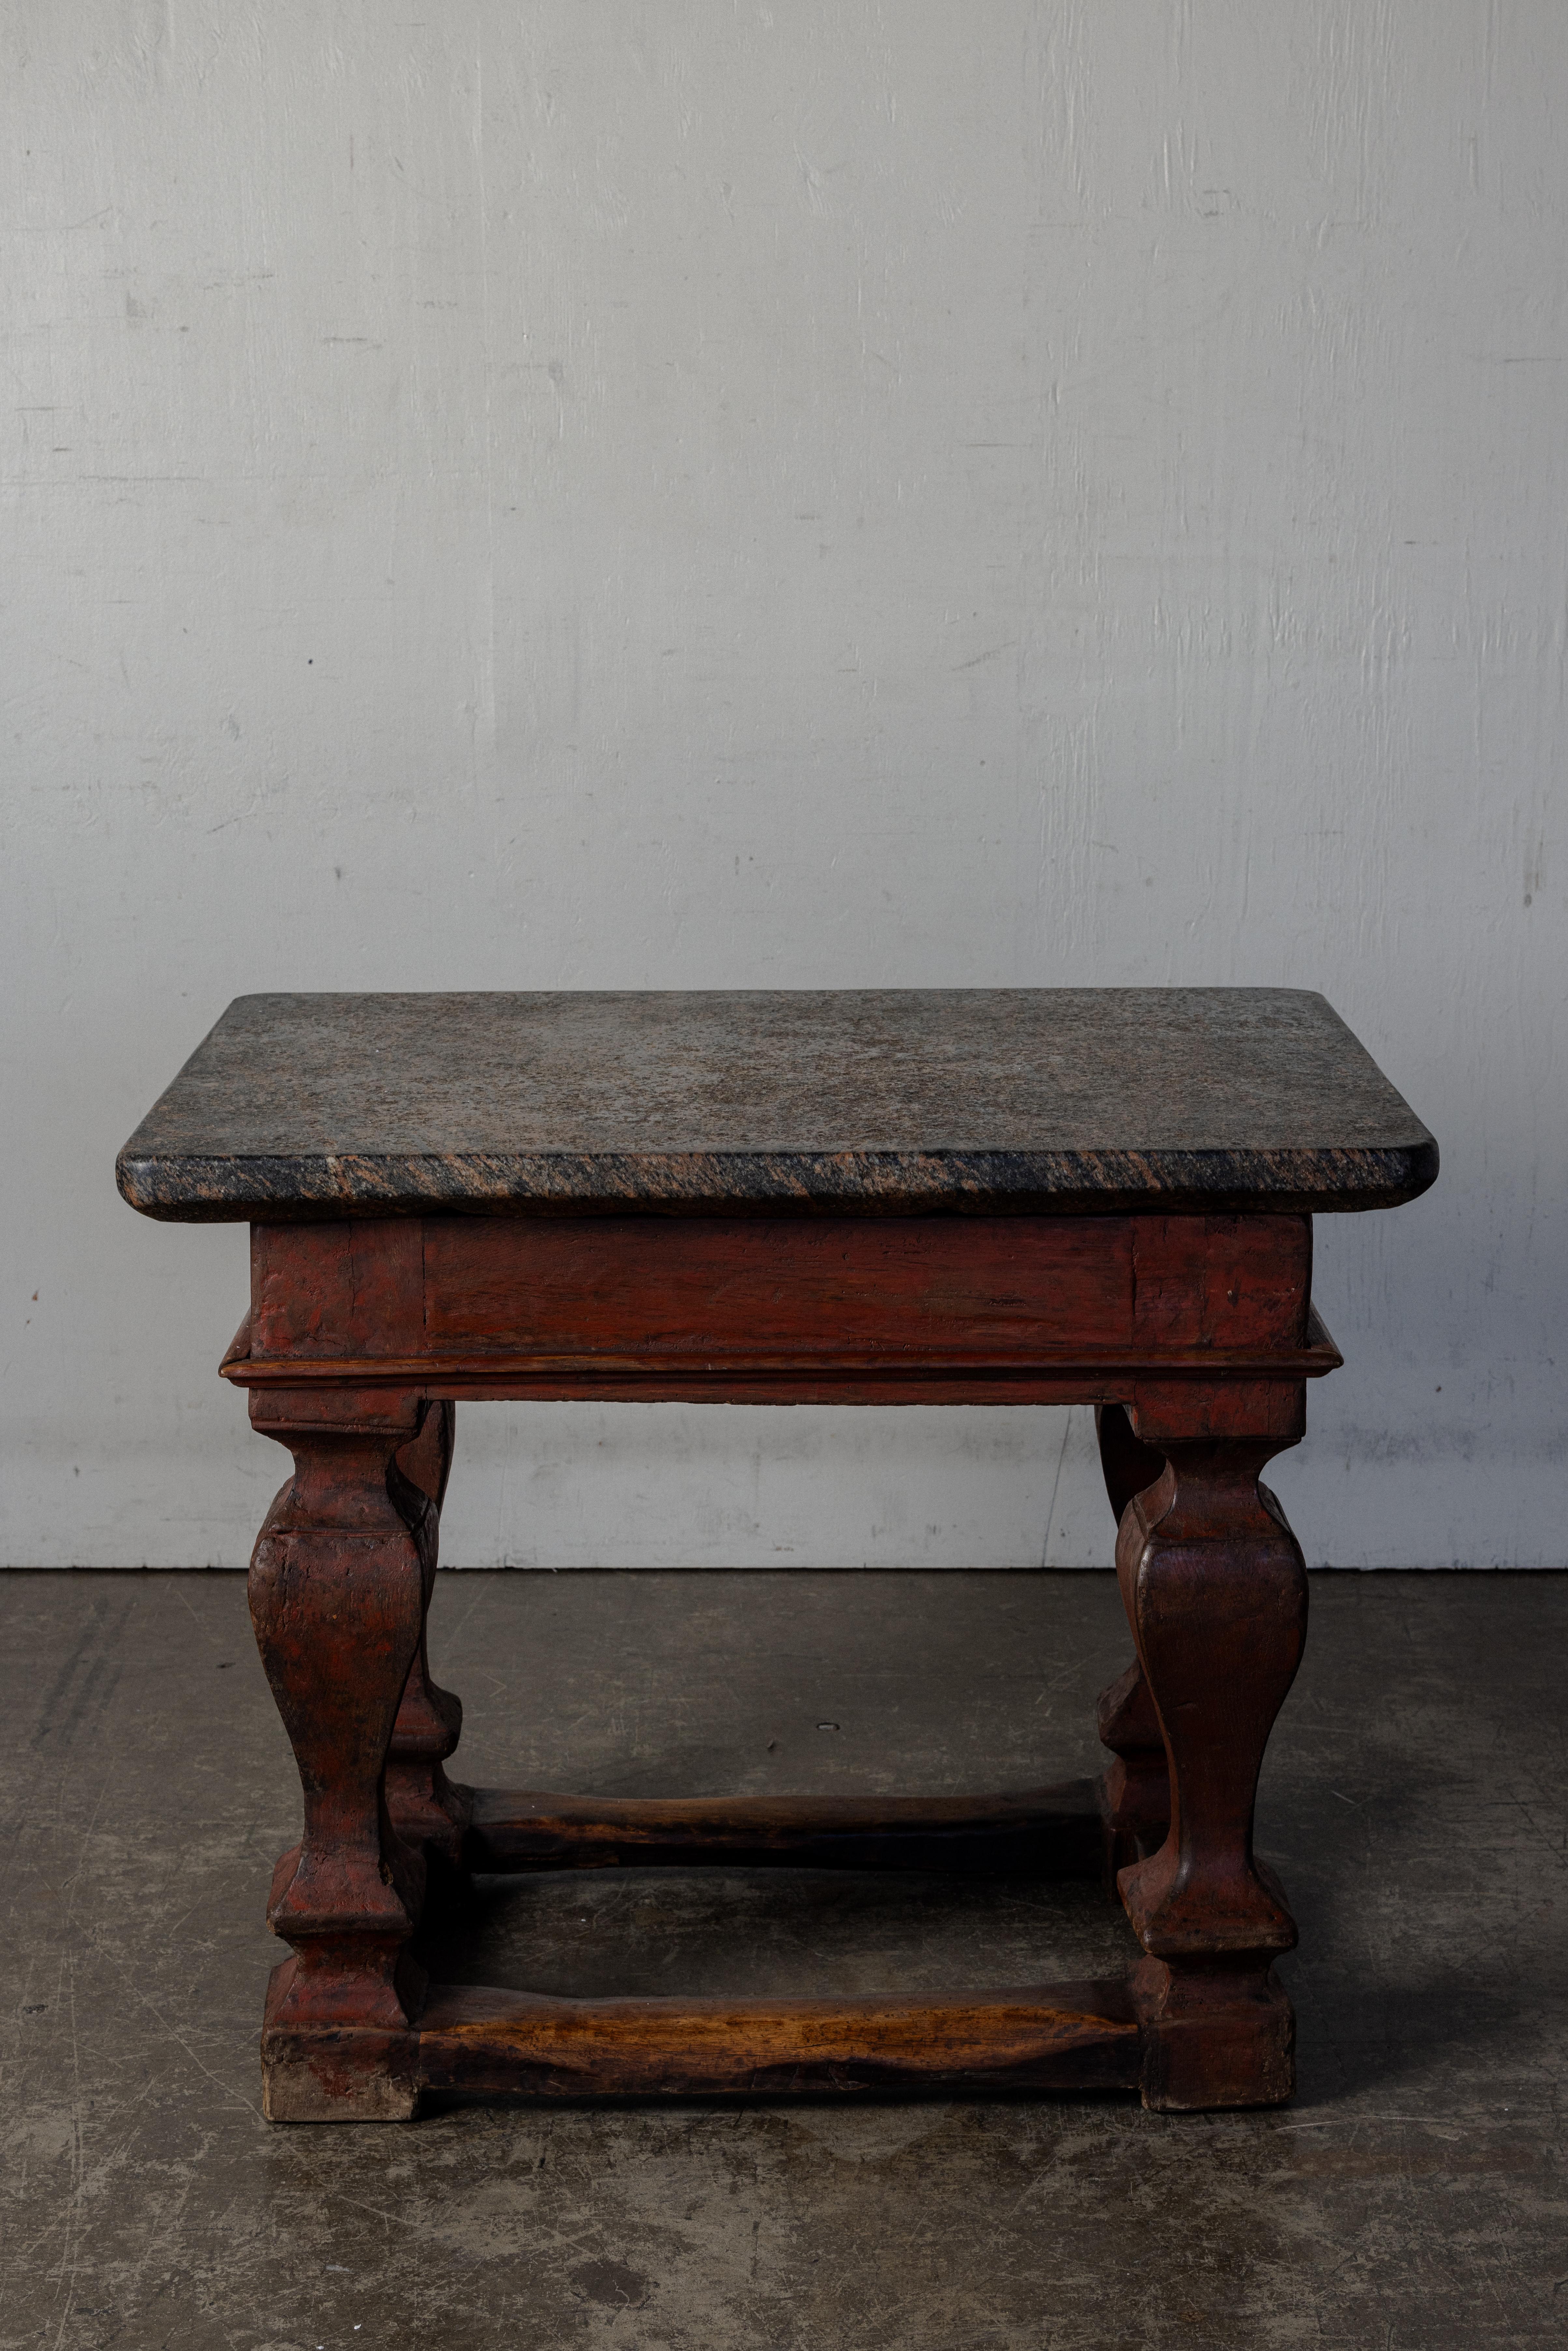 Stonetop Pedestal Table, Early 19th Century, France

H 32